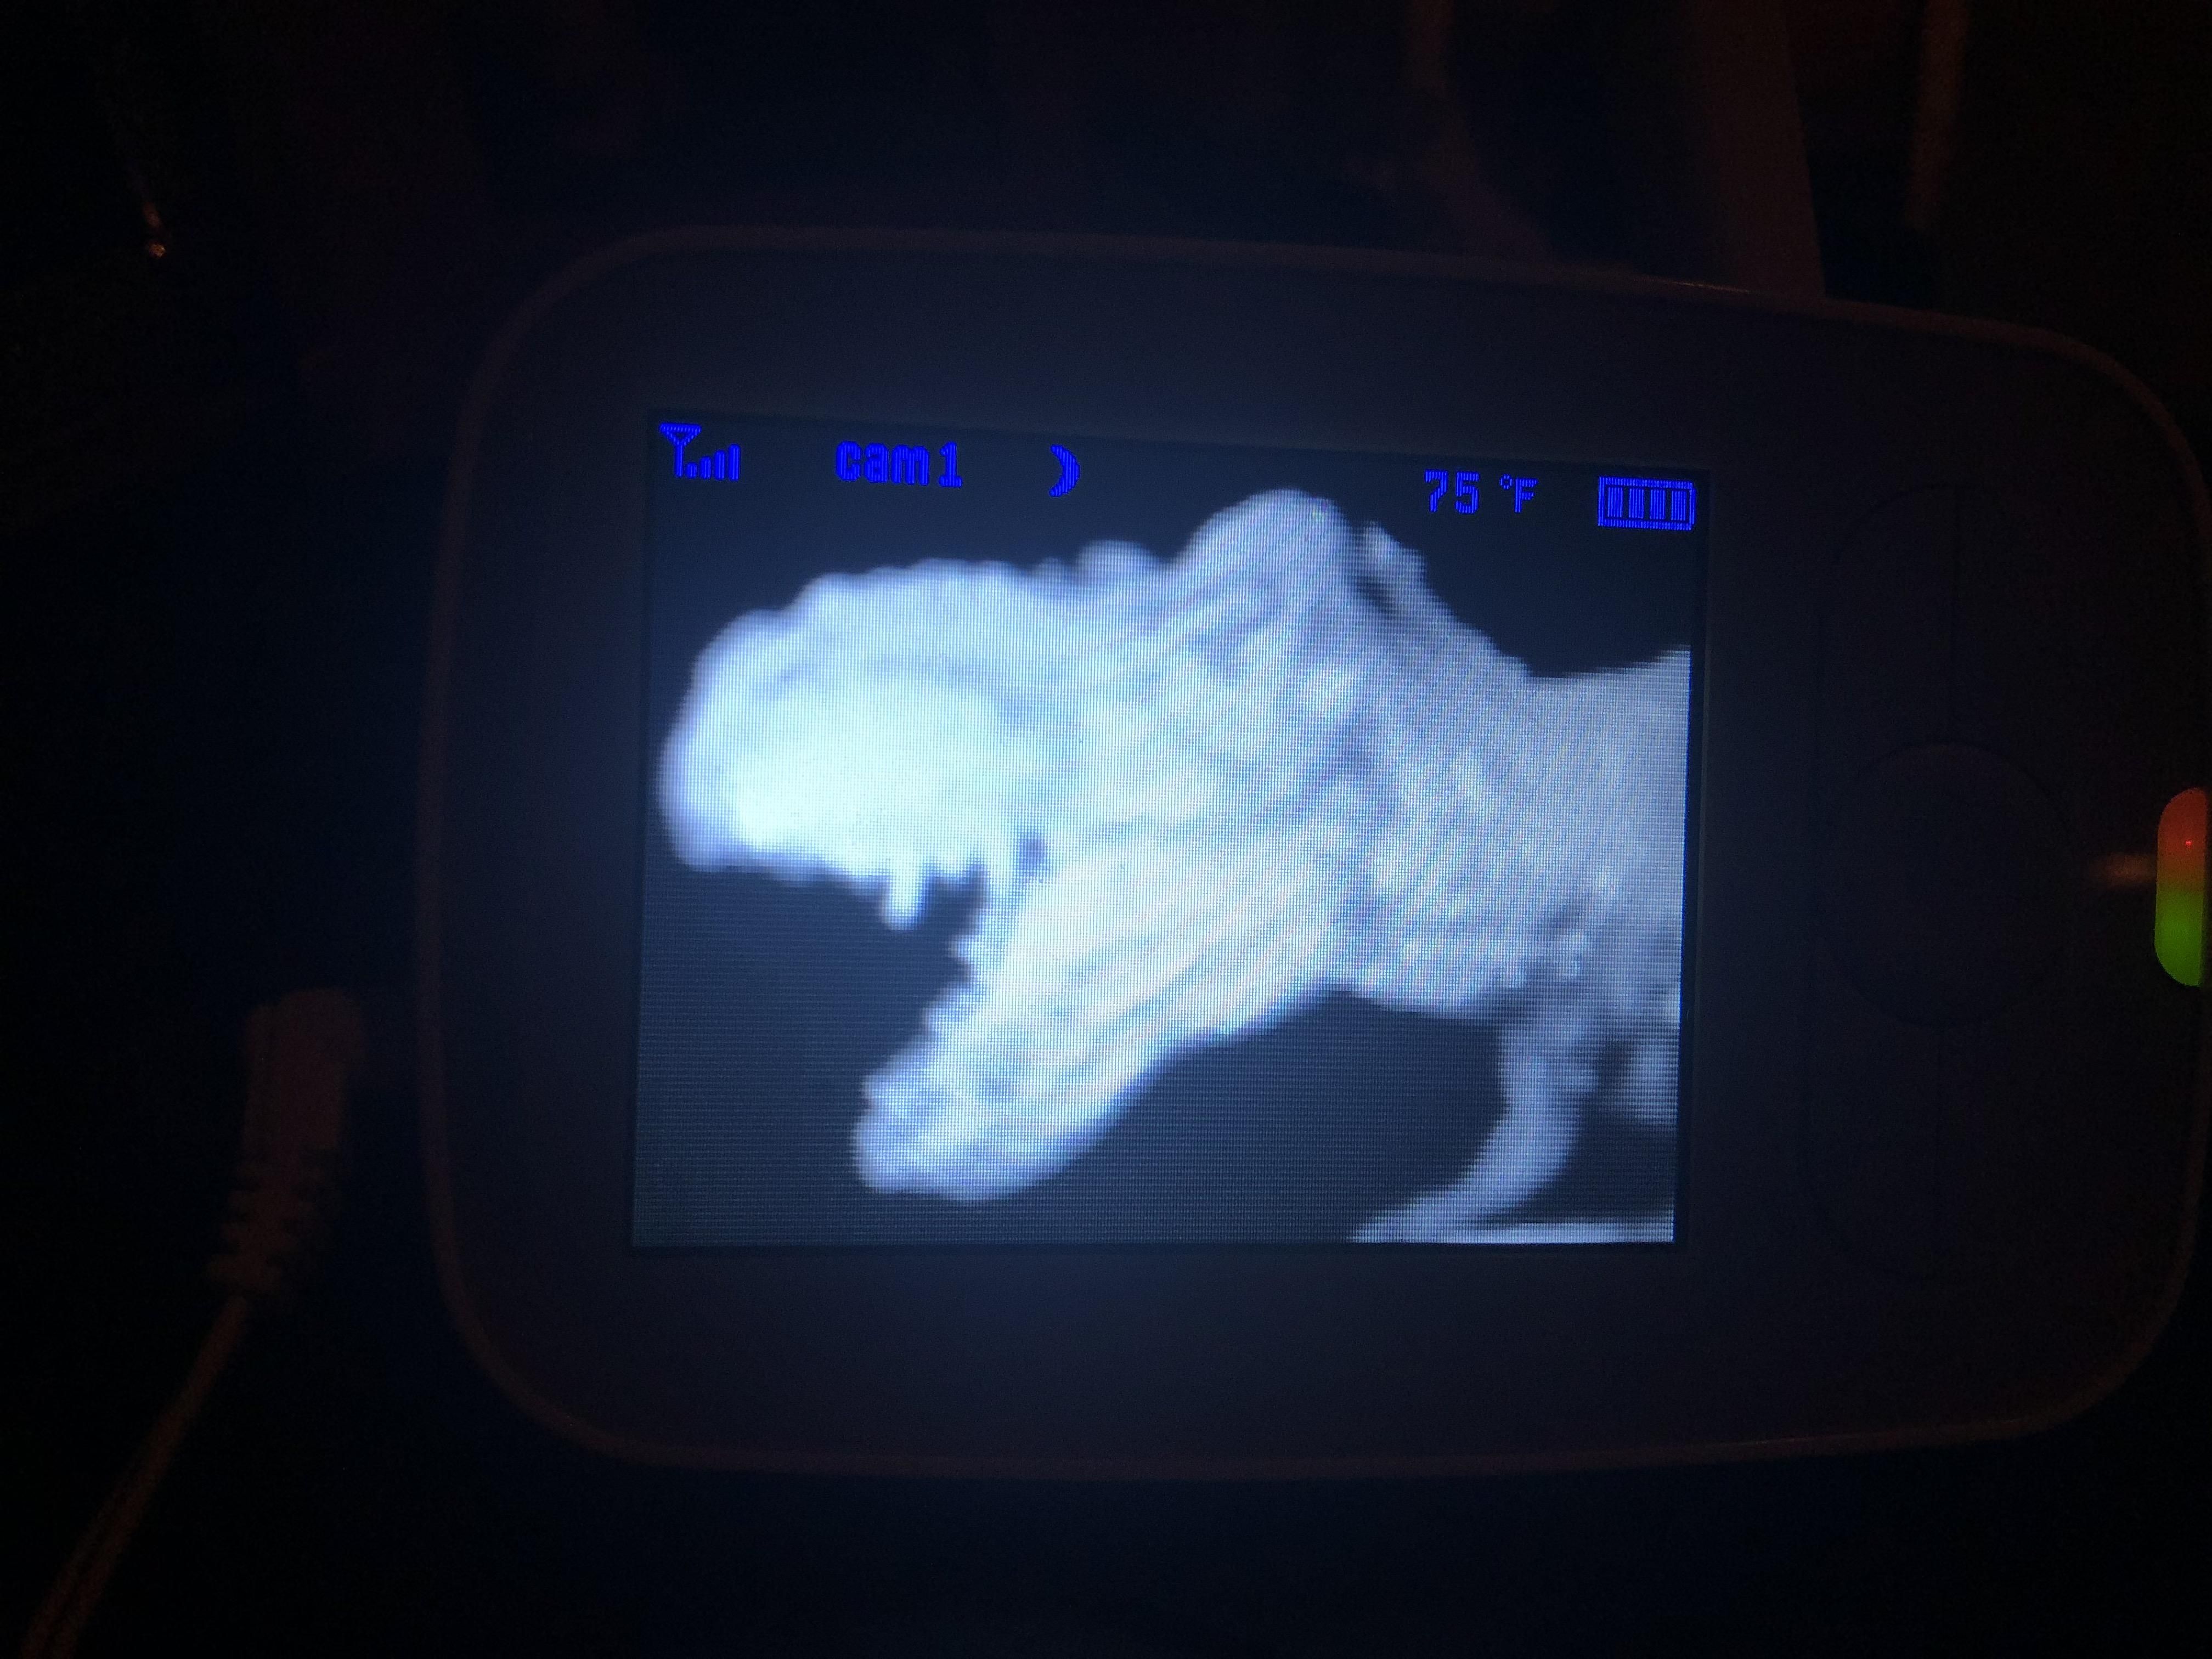 My son thought it would be funny to put his toy in front of the baby monitor.